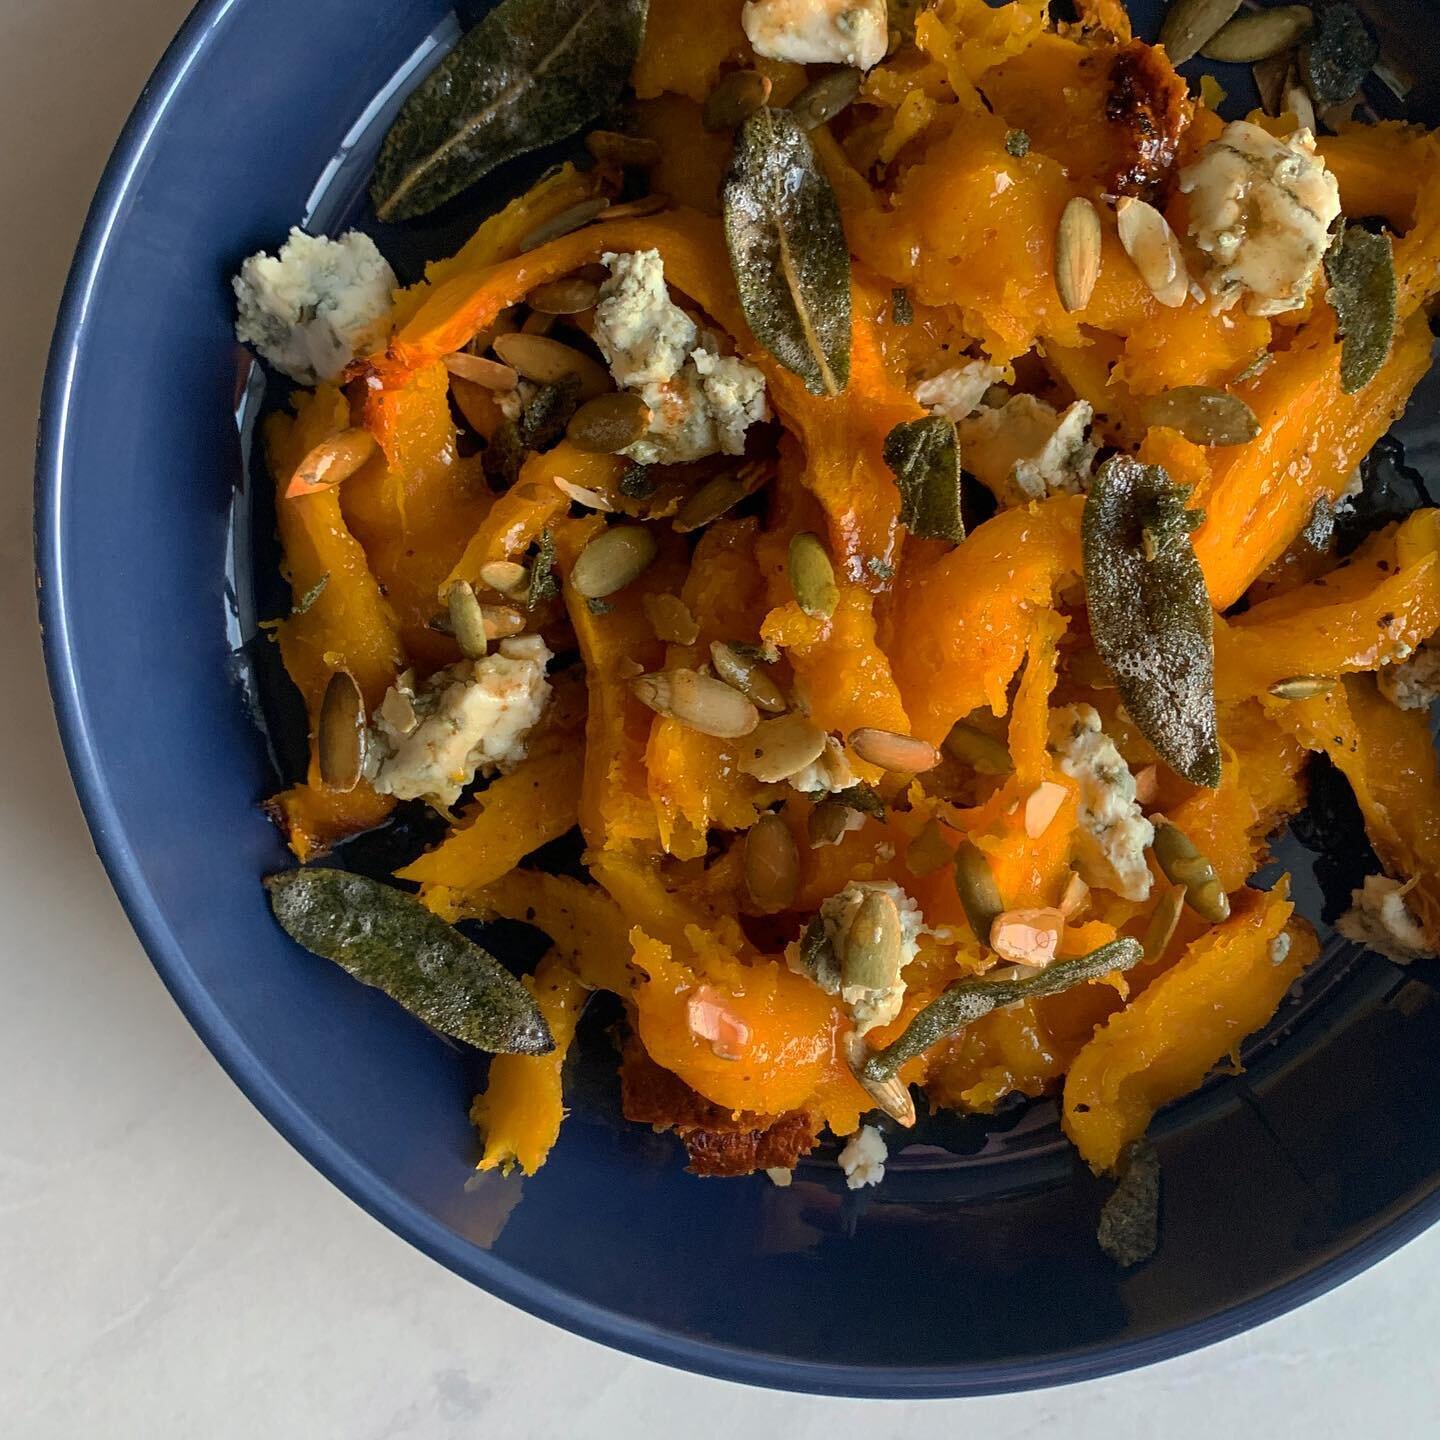 I had this sugar pumpkin sitting around on my sideboard looking pretty nice at Thanksgiving but today I was finally like &ldquo;Thanksgiving is over!&rdquo; so then I roasted it and made this:

Shredded roasted pumpkin flesh with Gorgonzola and pepit